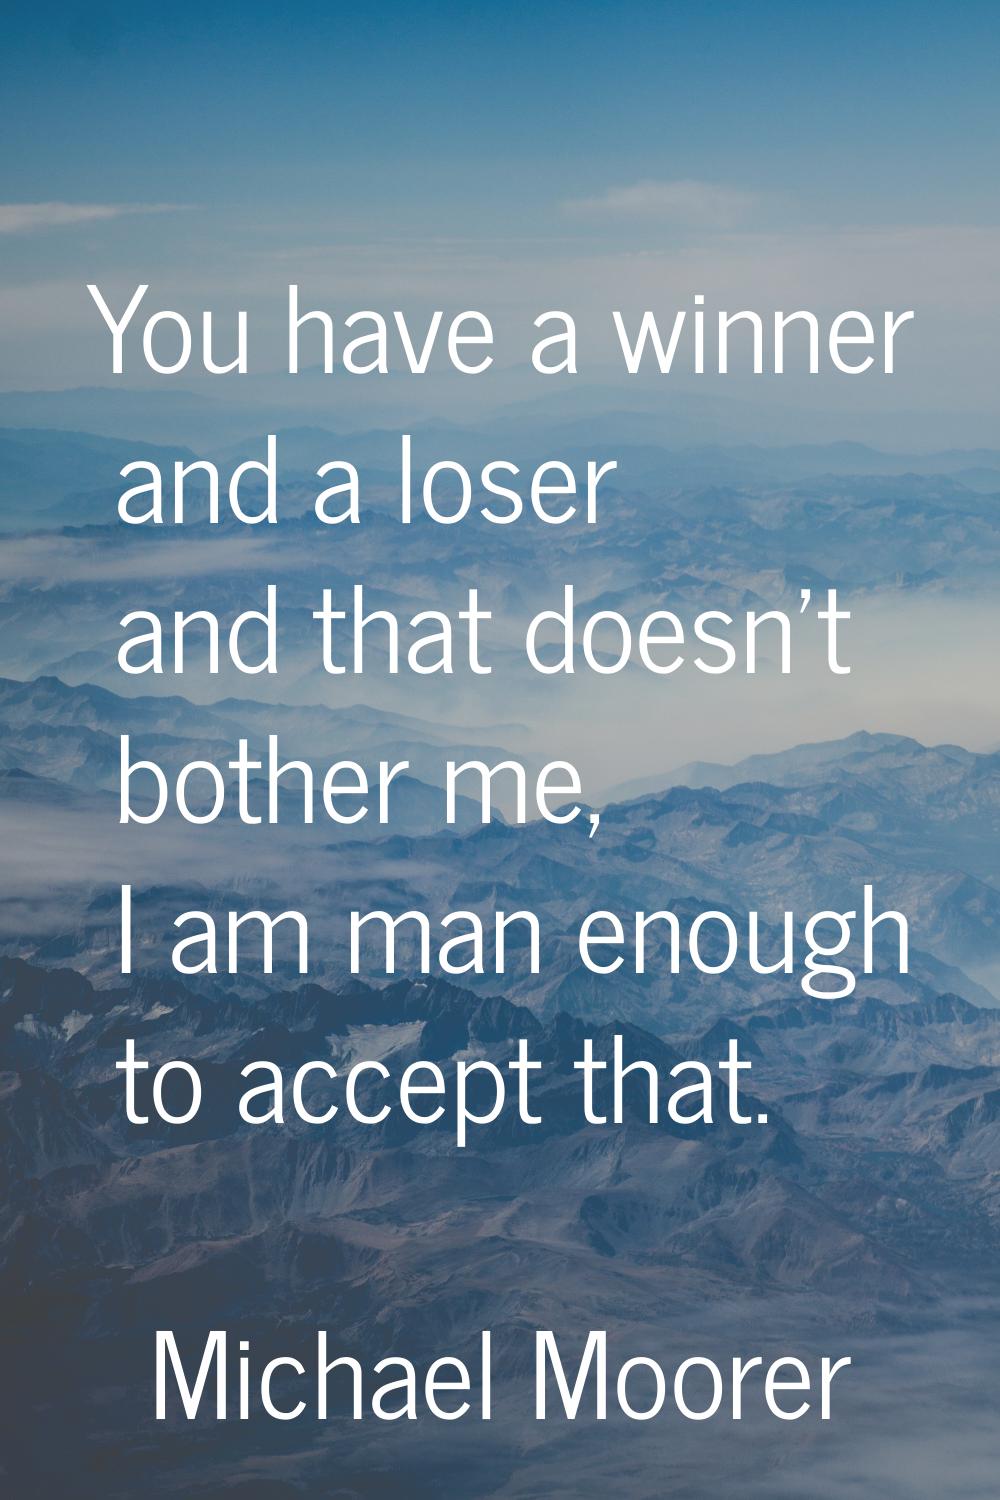 You have a winner and a loser and that doesn't bother me, I am man enough to accept that.